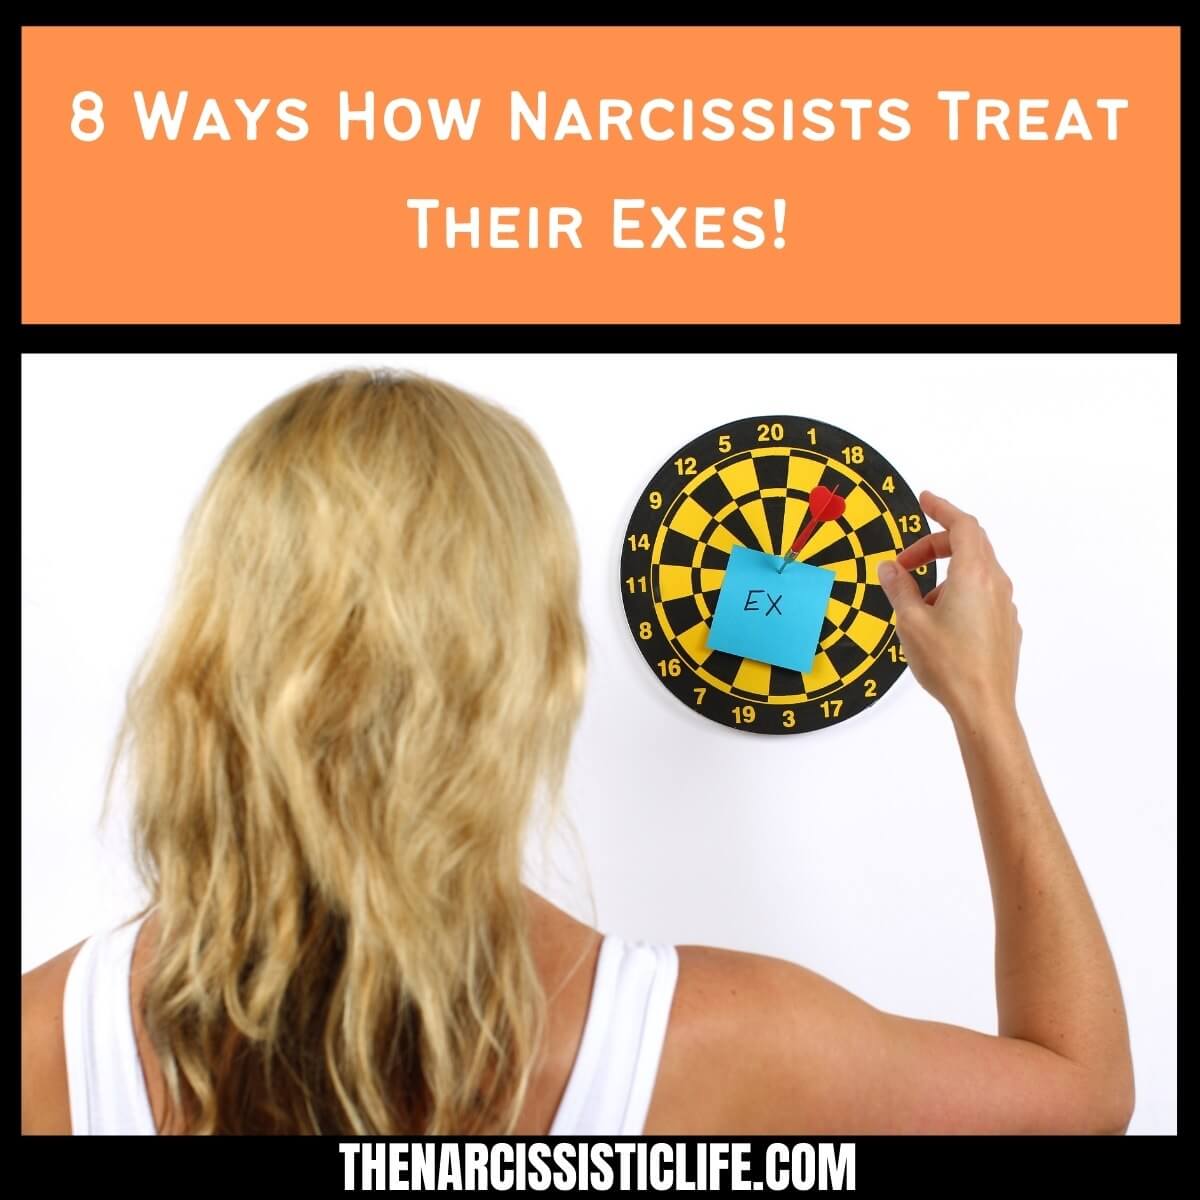 8 Ways How Narcissists Treat Their Exes